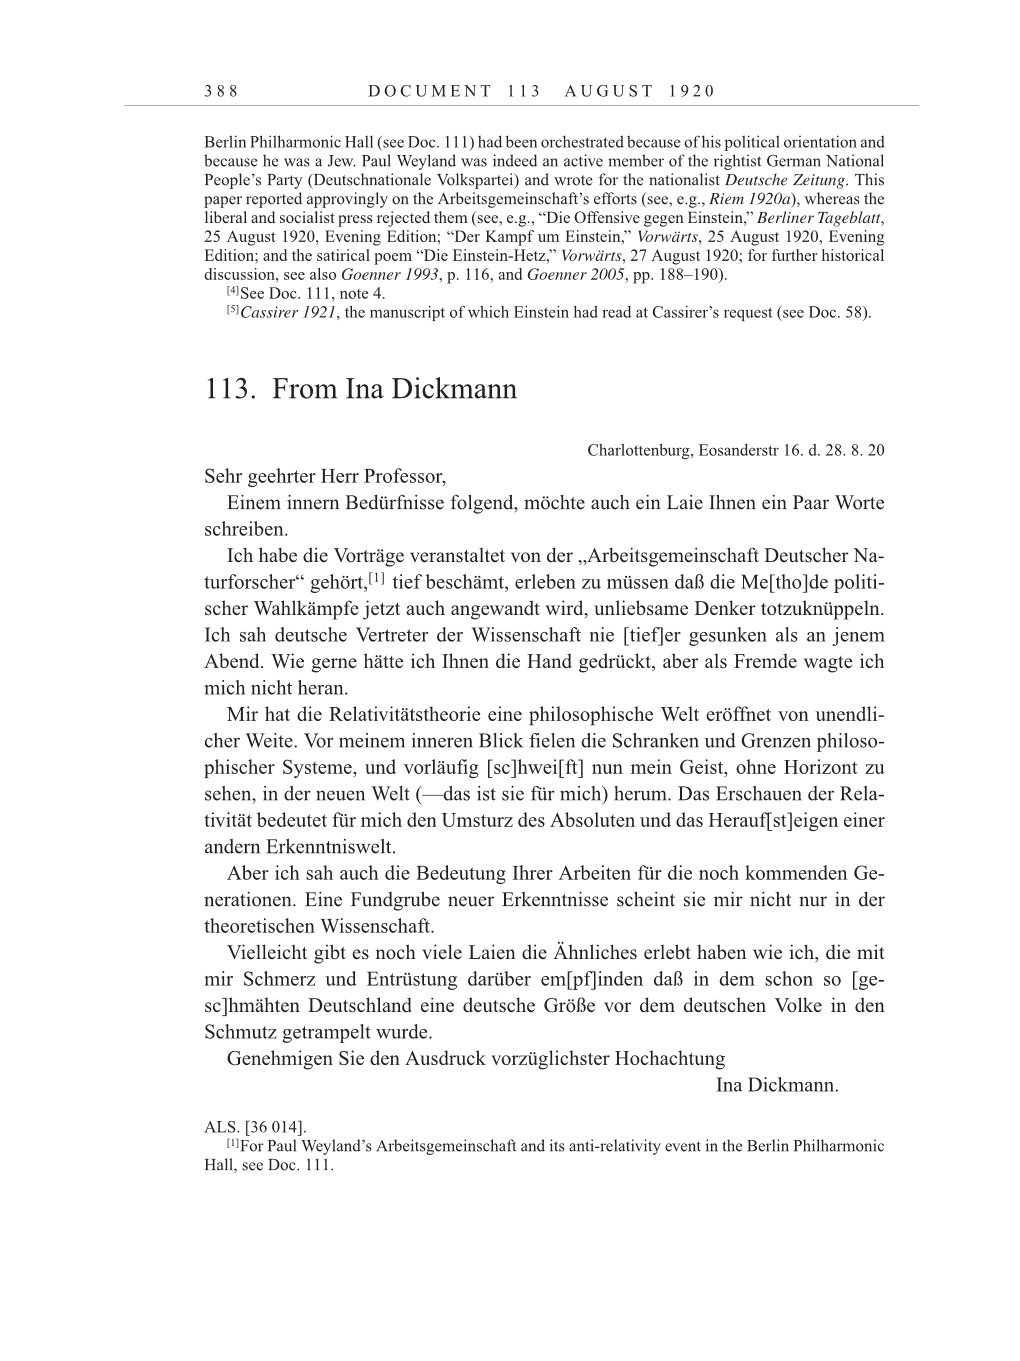 Volume 10: The Berlin Years: Correspondence May-December 1920 / Supplementary Correspondence 1909-1920 page 388